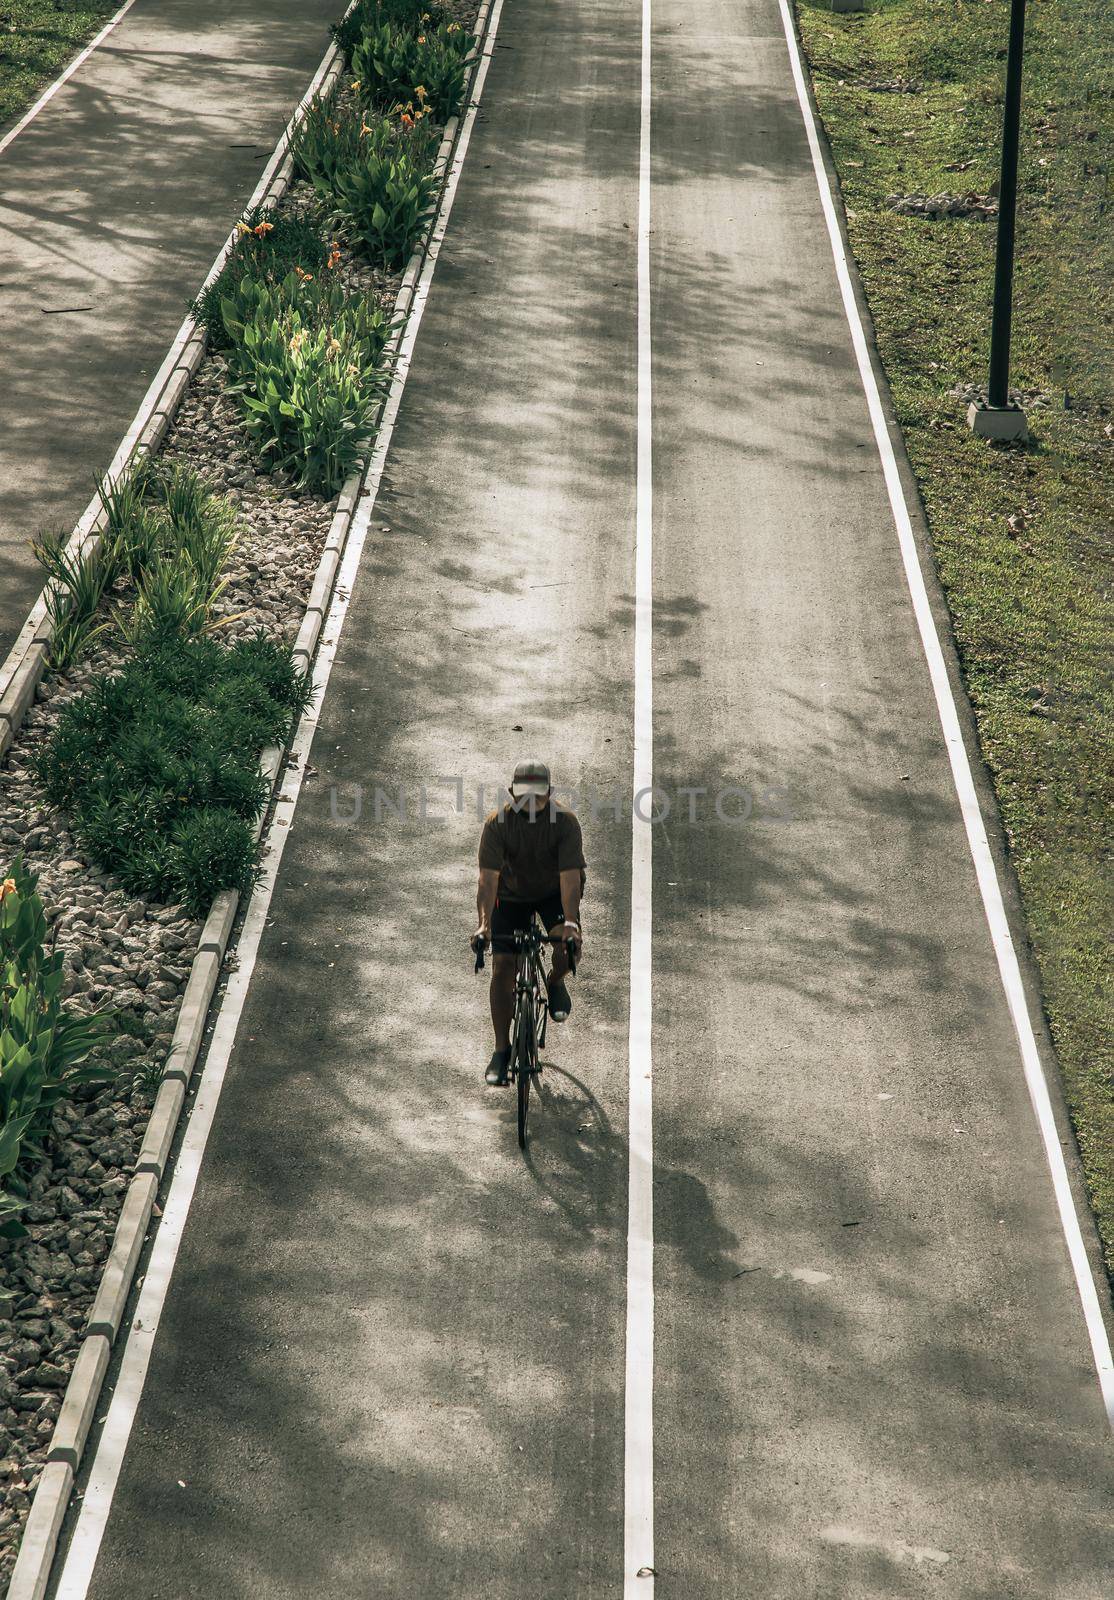 The cyclist riding a mountain bike an road along in a city park.  by tosirikul